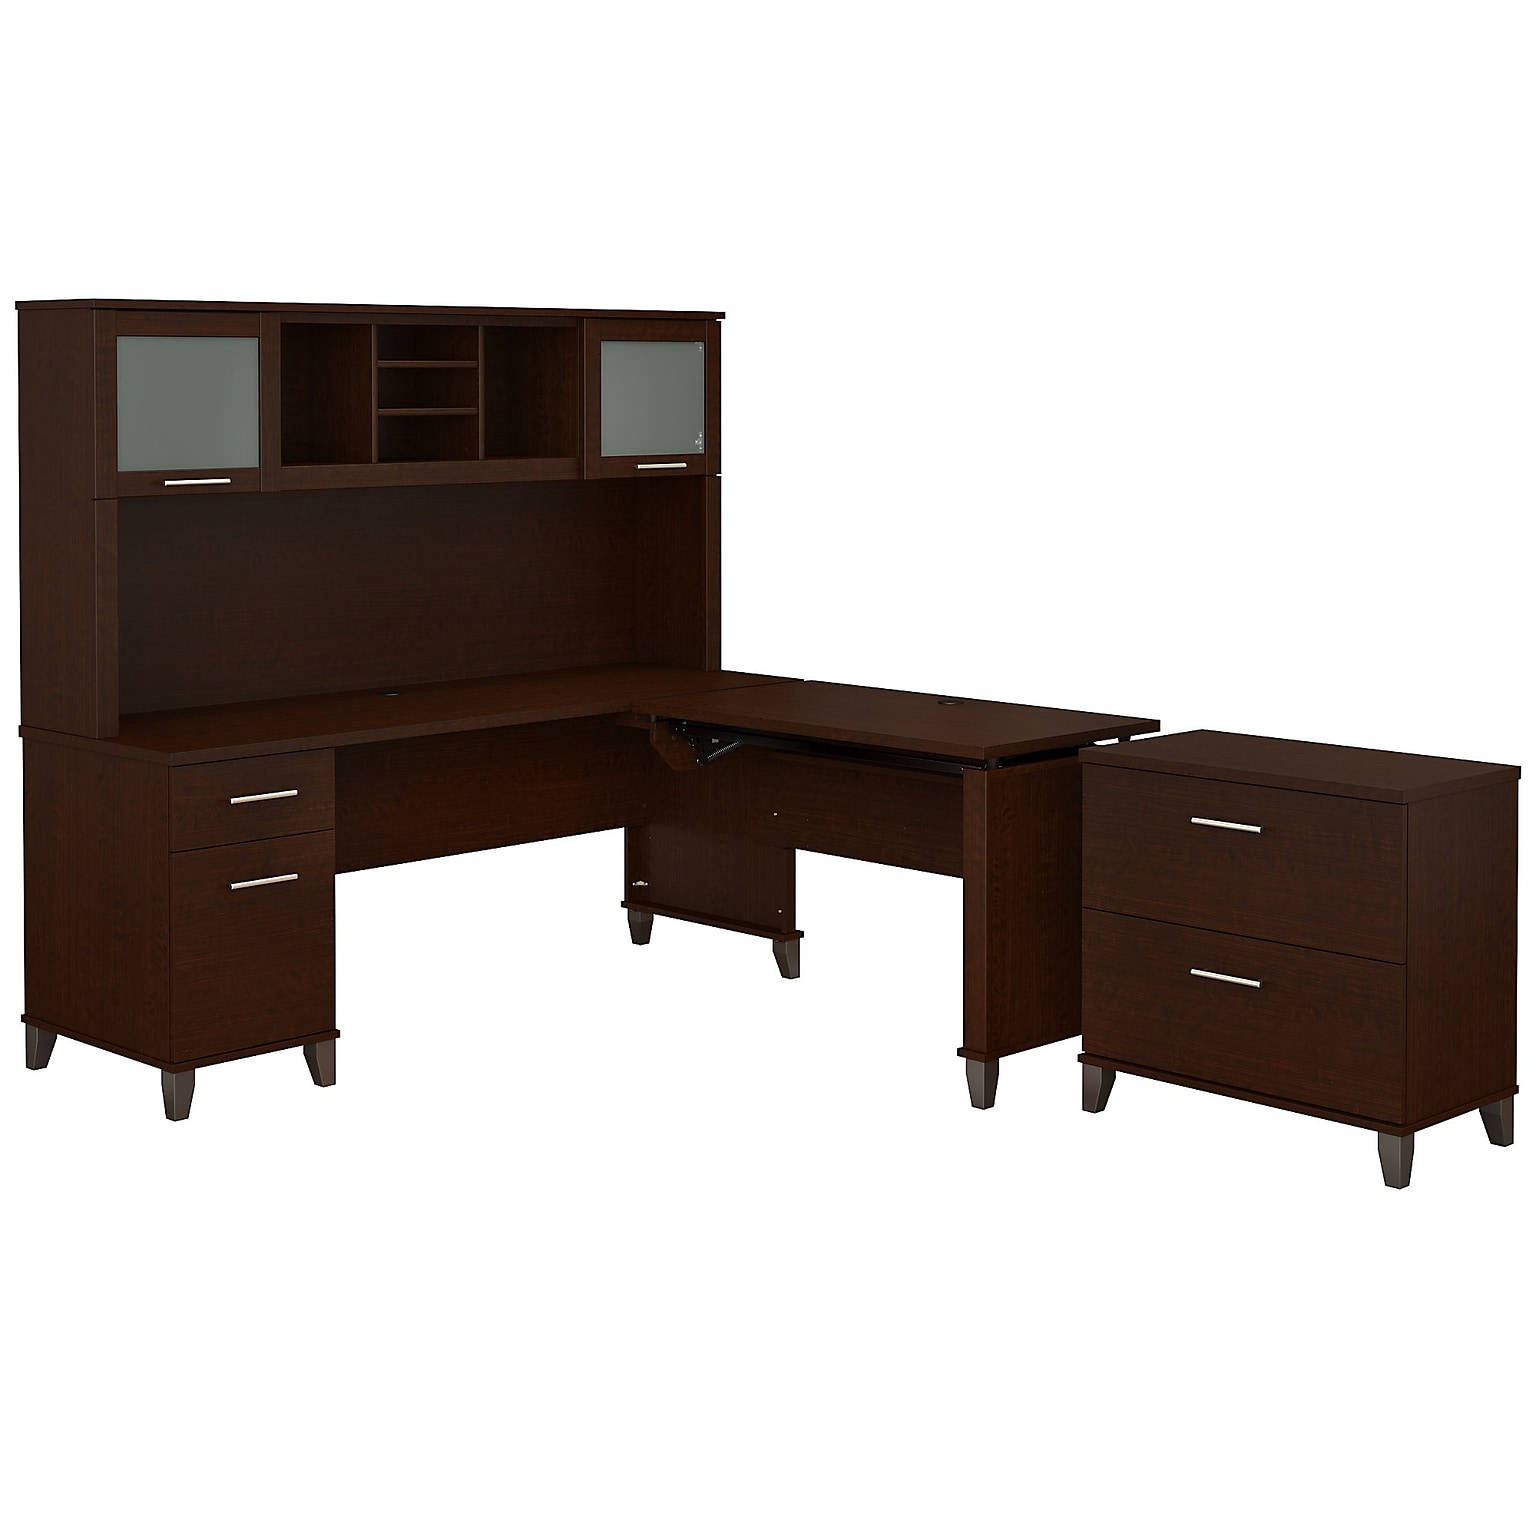 Bush Furniture Somerset 72W 3 Position Sit to Stand L Shaped Desk with Hutch and File Cabinet, Mocha Cherry (SET016MR)